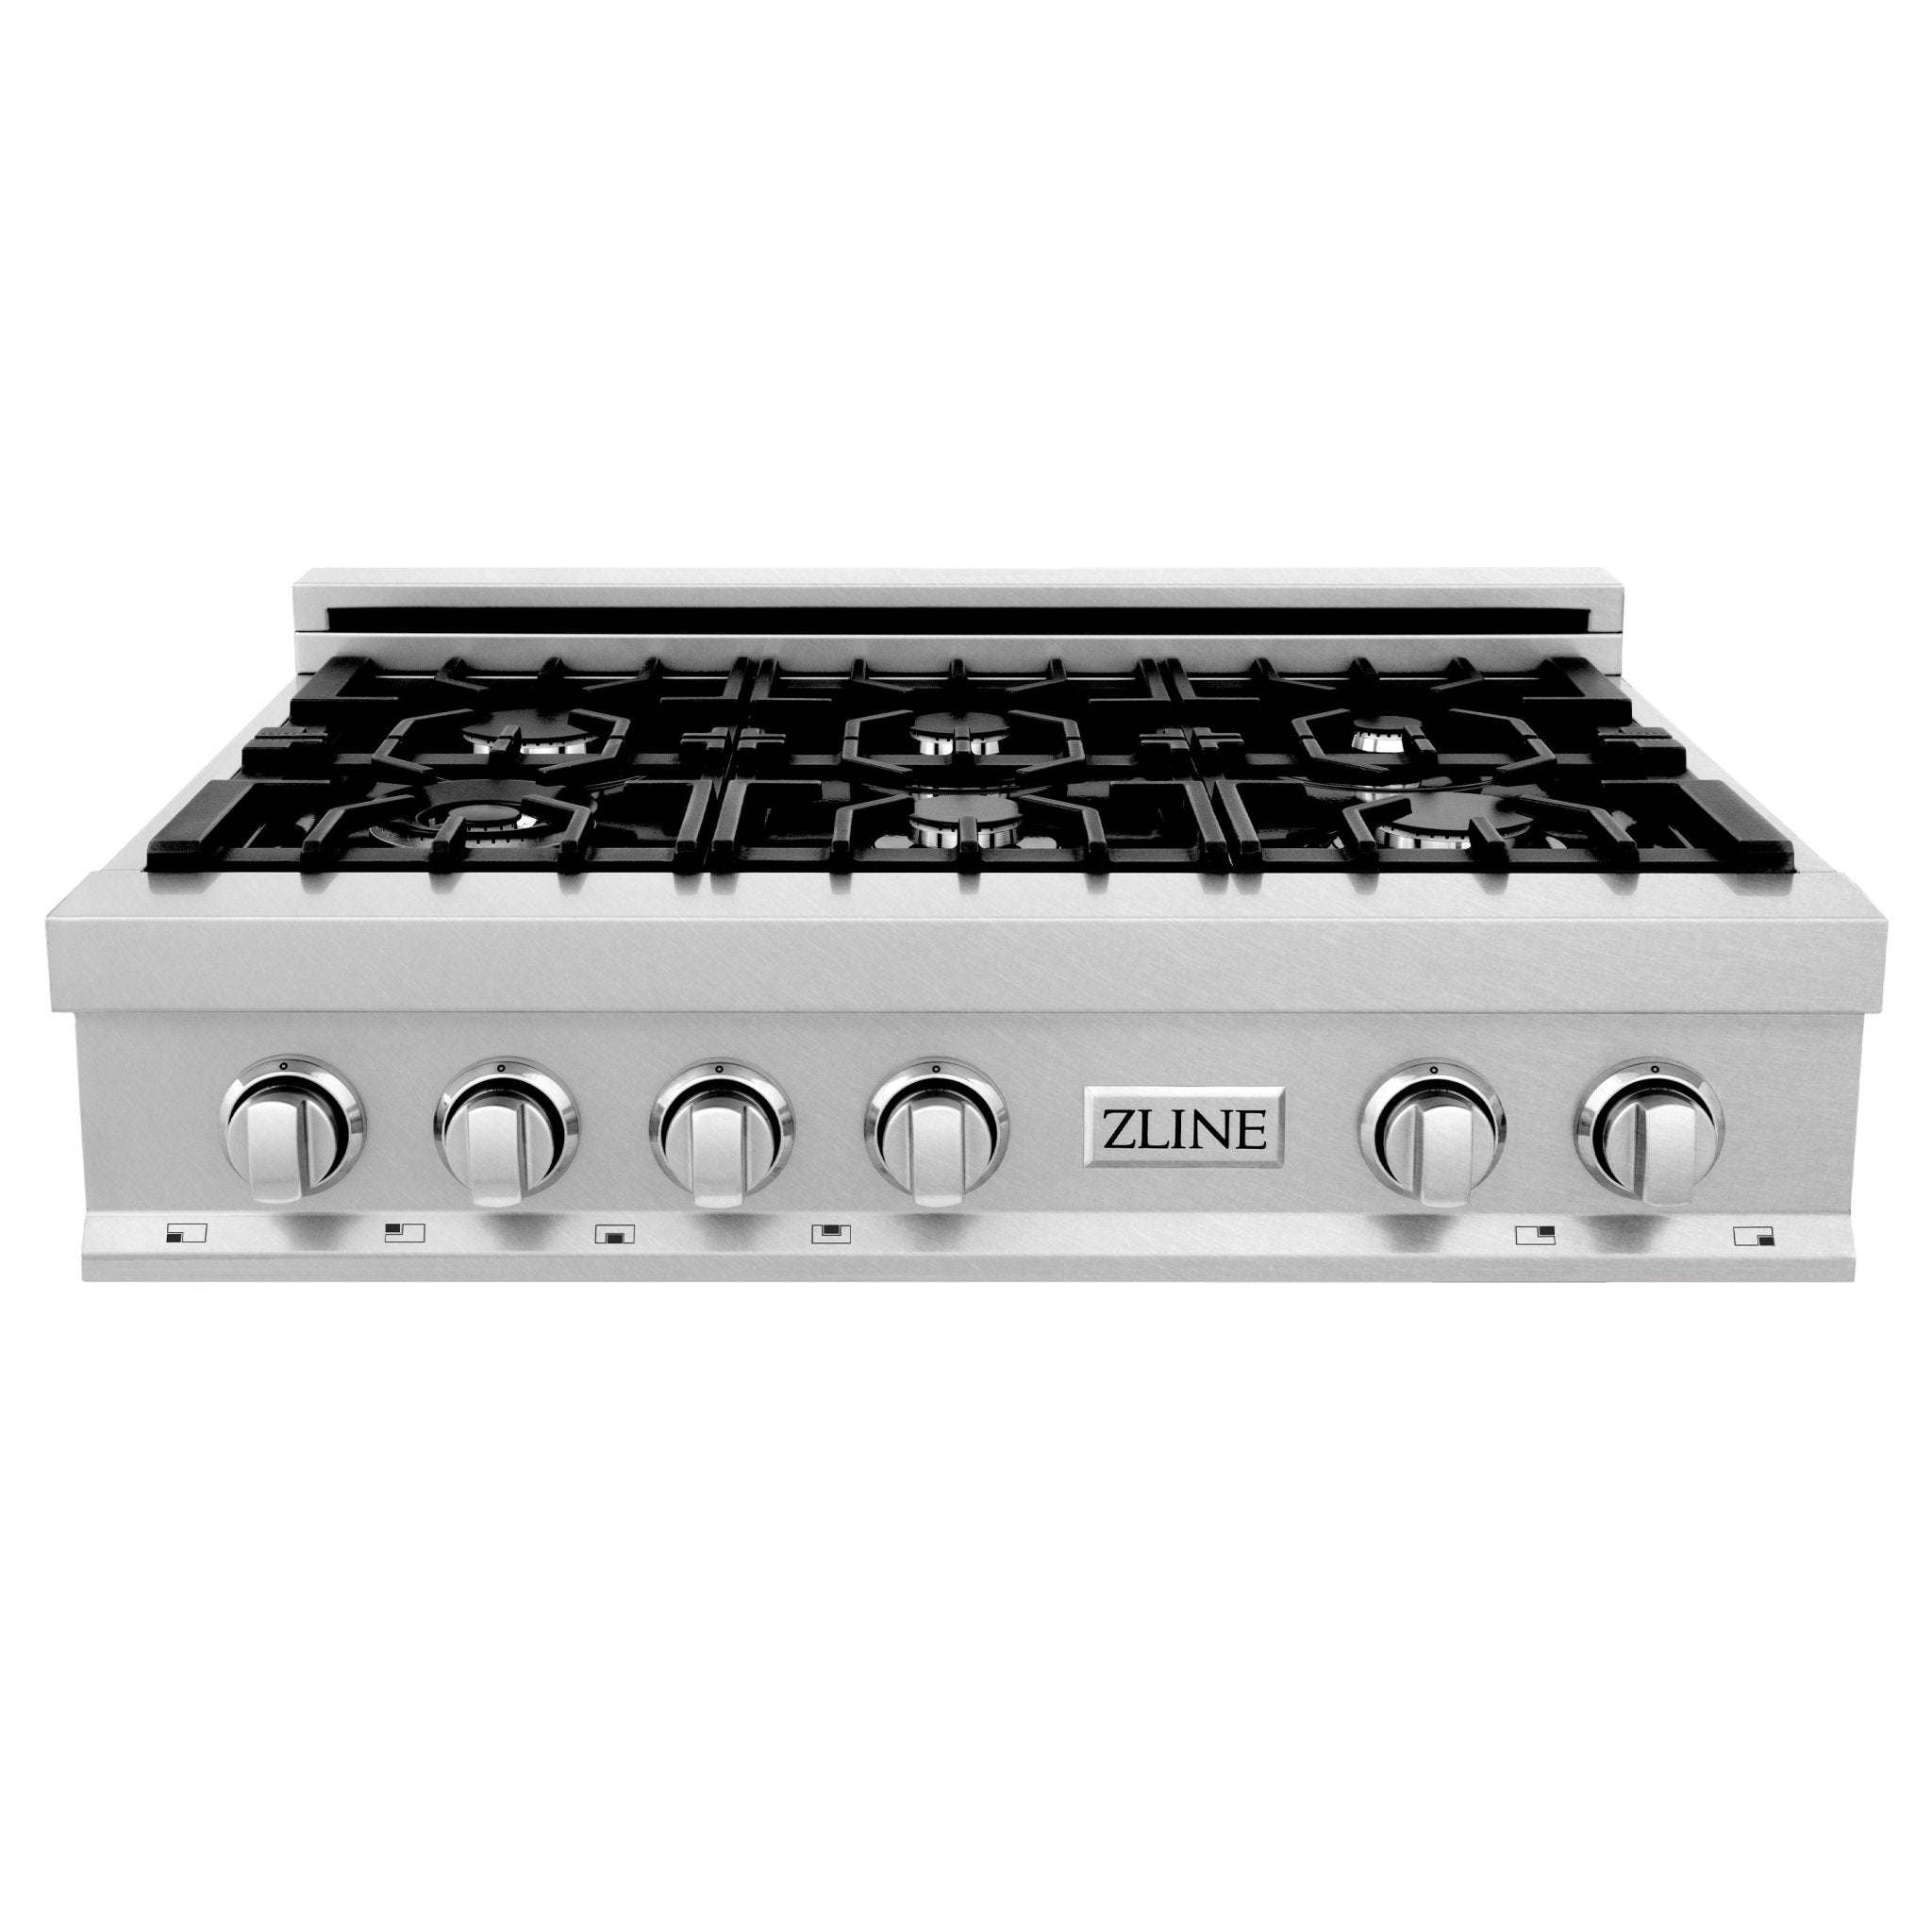 ZLINE 36" Porcelain Gas Stovetop in Fingerprint Resistant Stainless Steel with 6 Gas Burners (RTS-36)